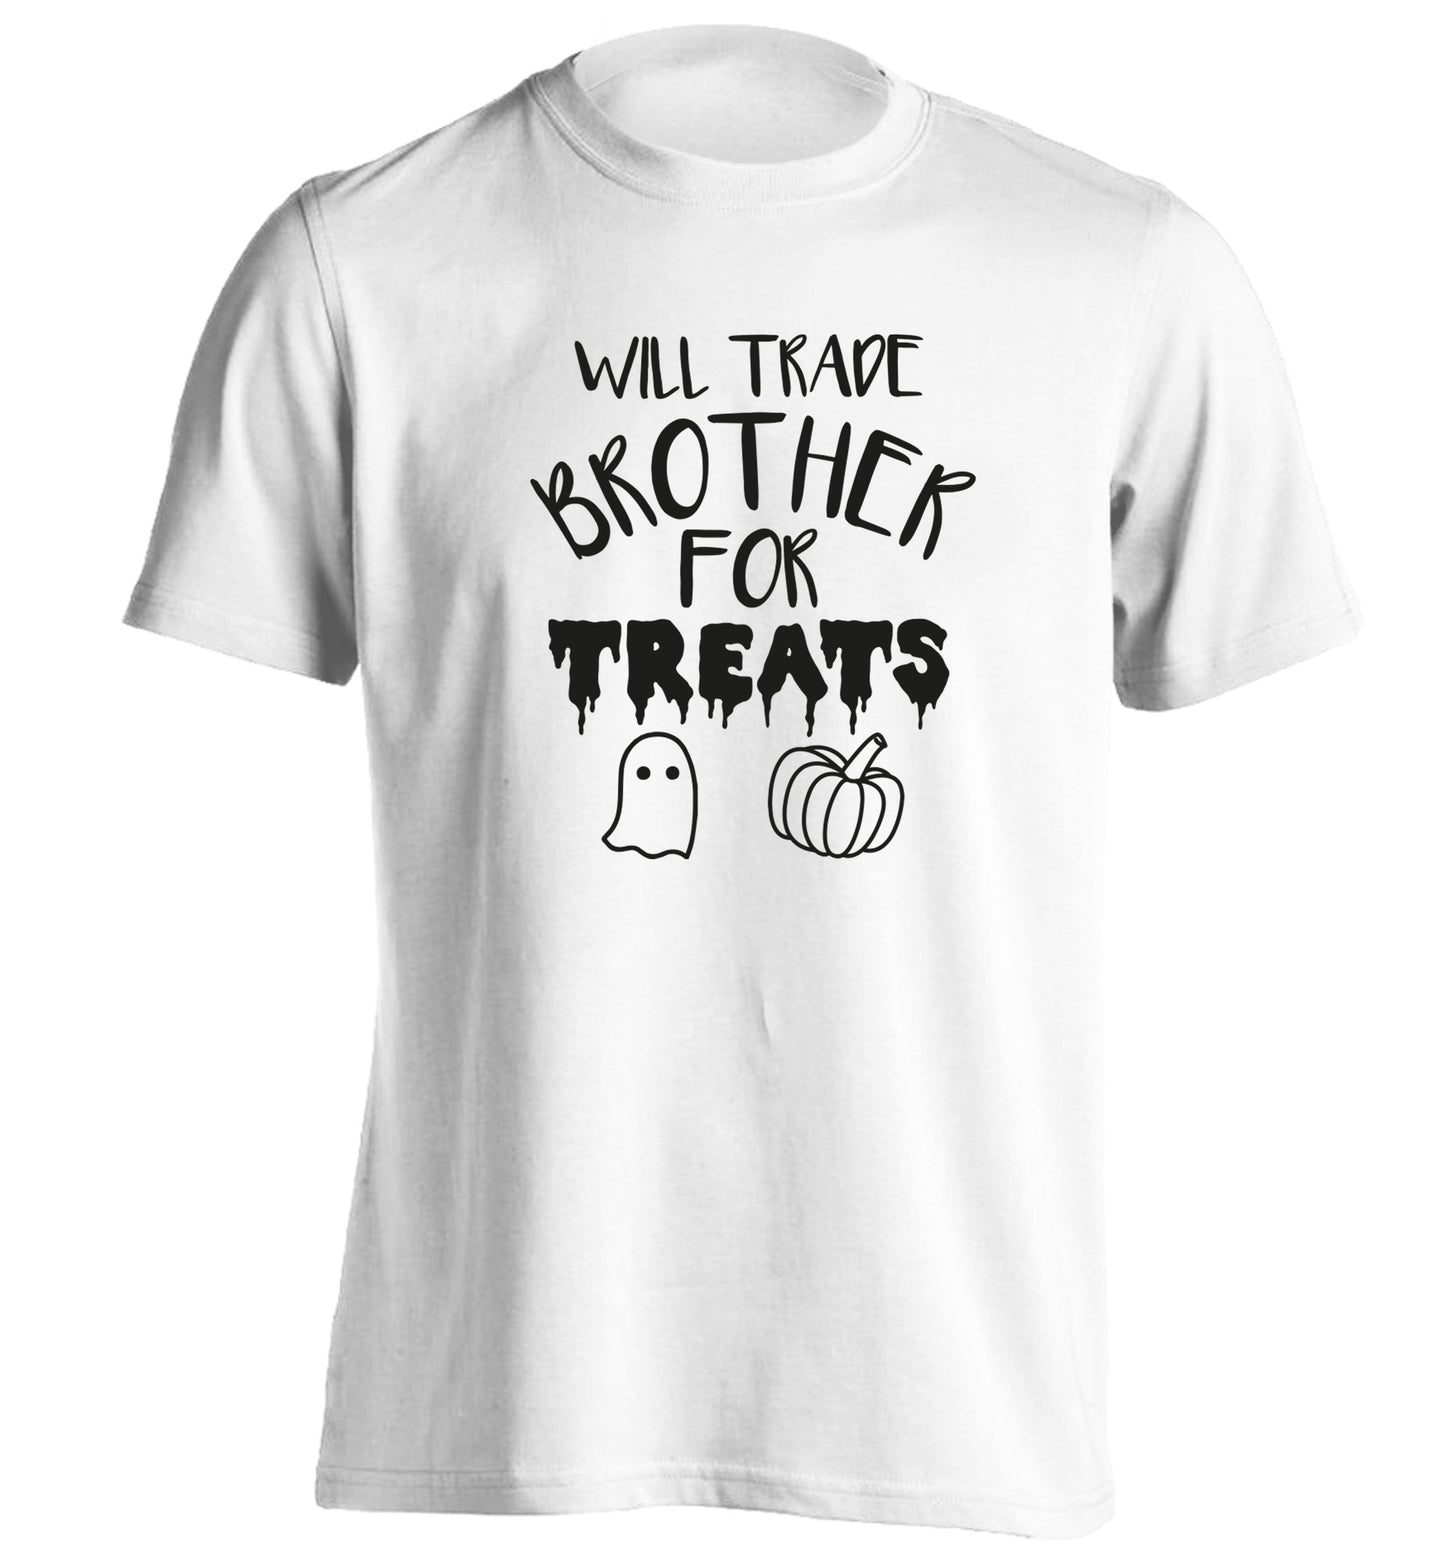 Will trade brother for treats adults unisex white Tshirt 2XL